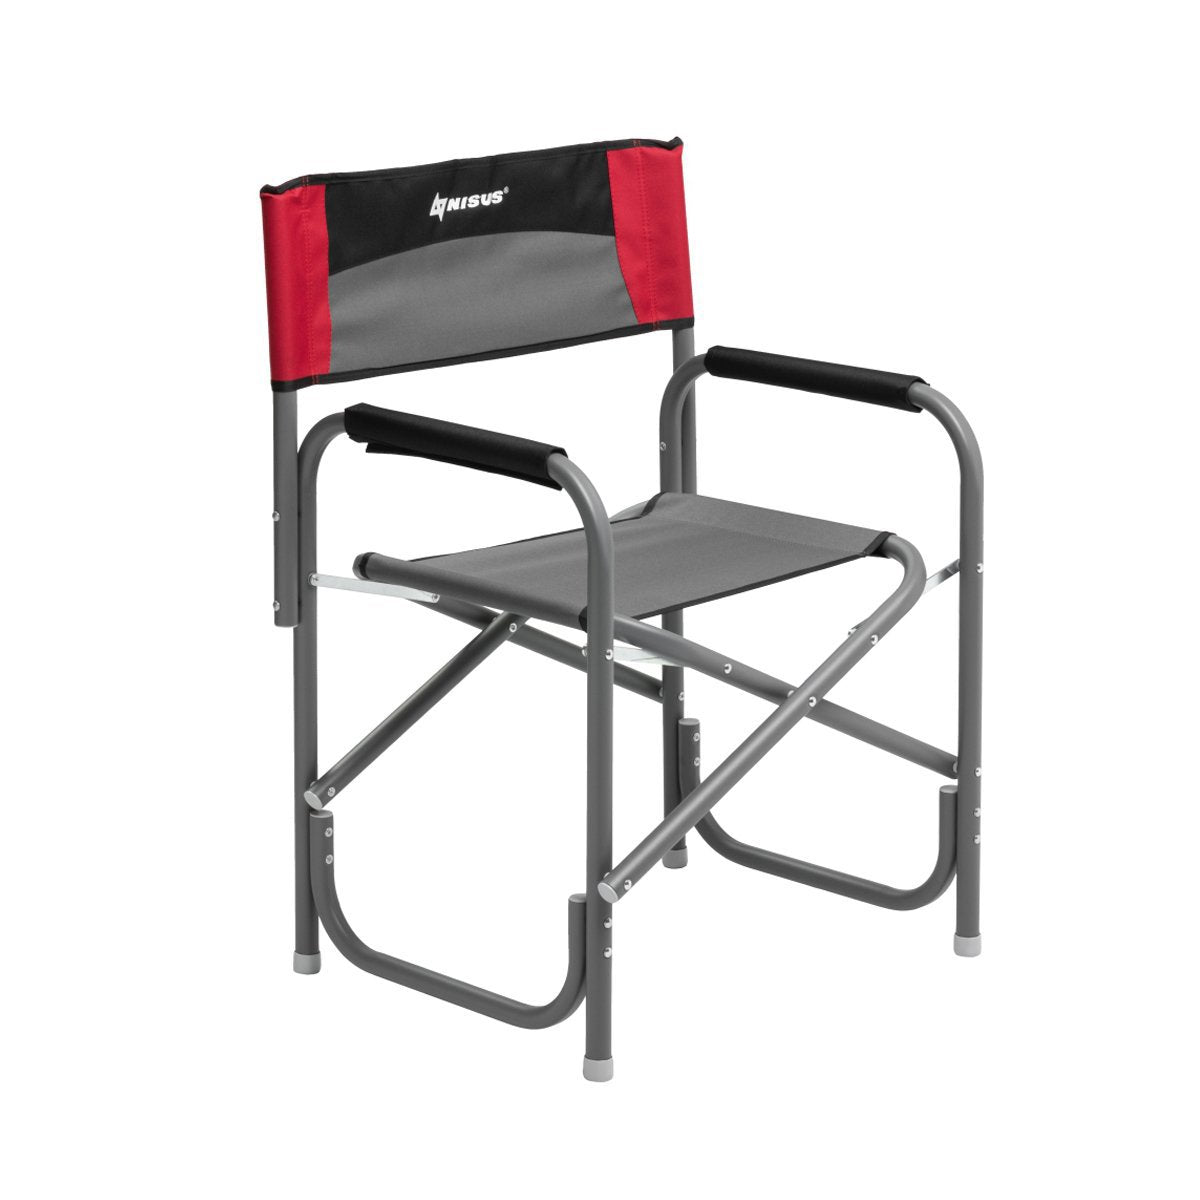 Portable Aluminum Folding Director's Chair for Camping